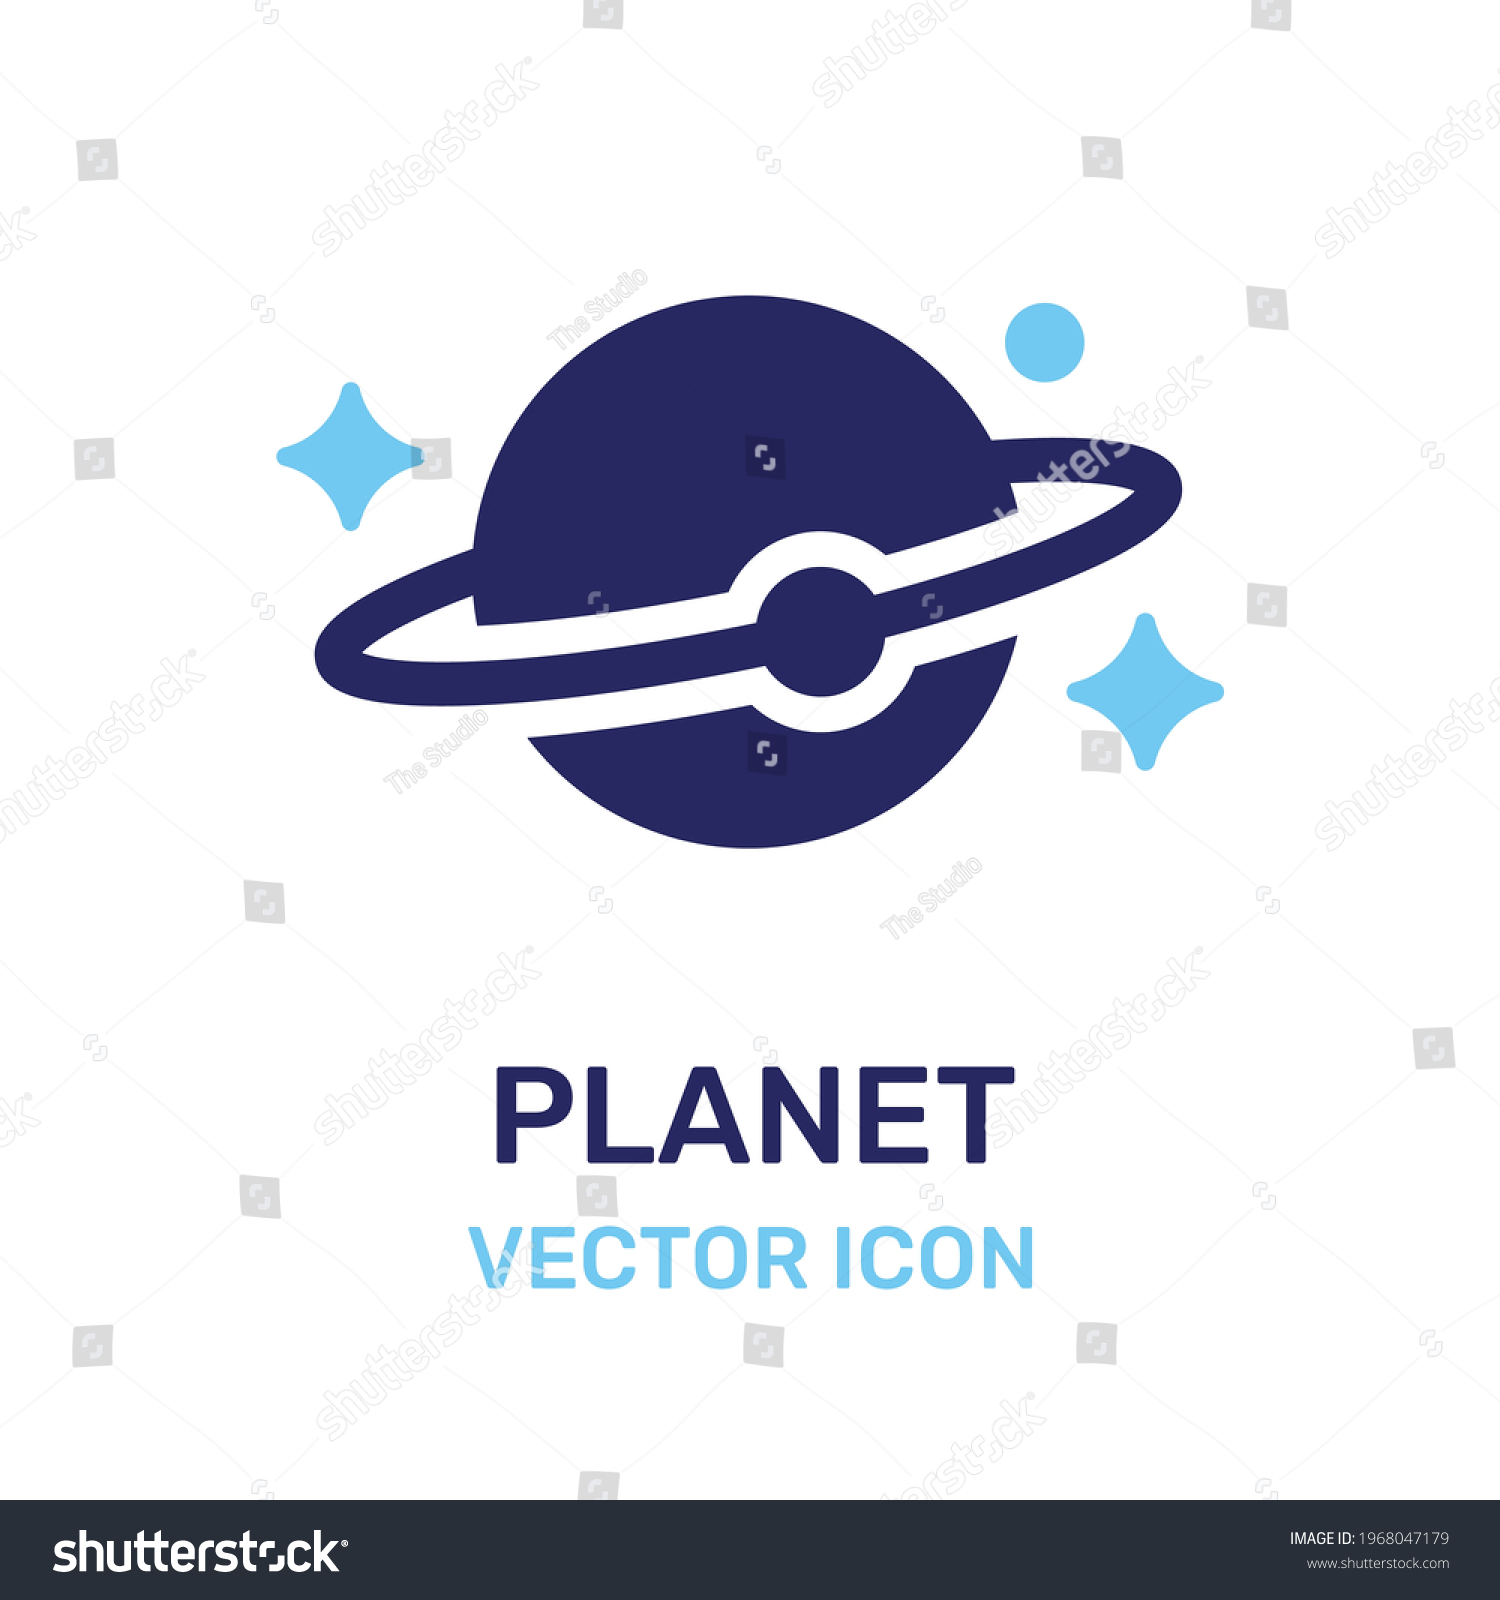 SVG of Planet in space orbiting icon vector svg